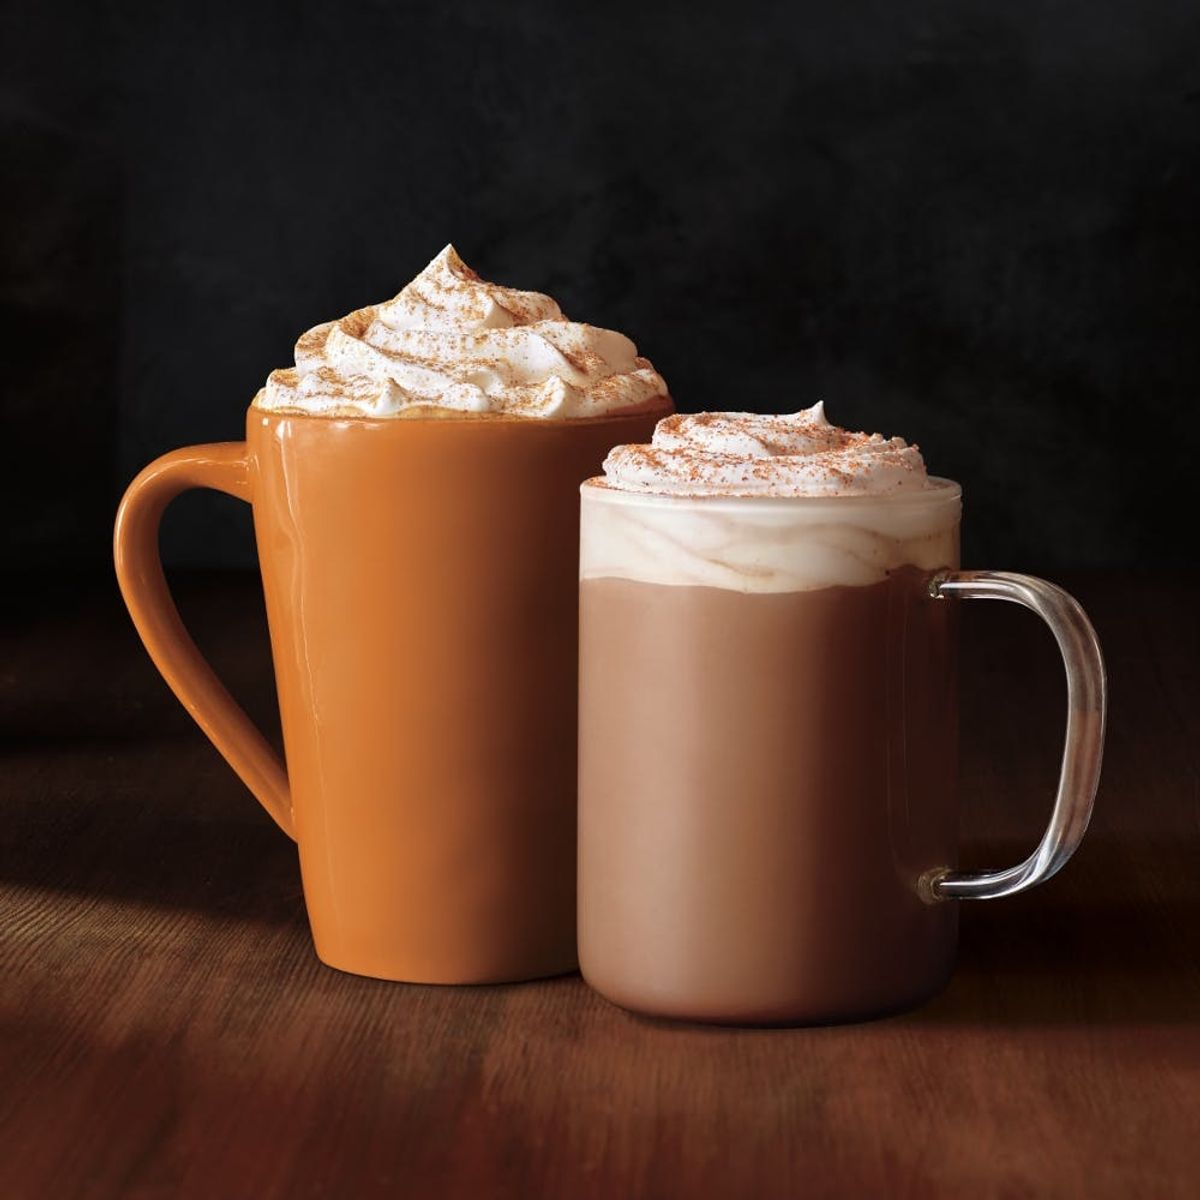 Starbucks Is Ready for Fall With These Seasonal Drinks and Desserts